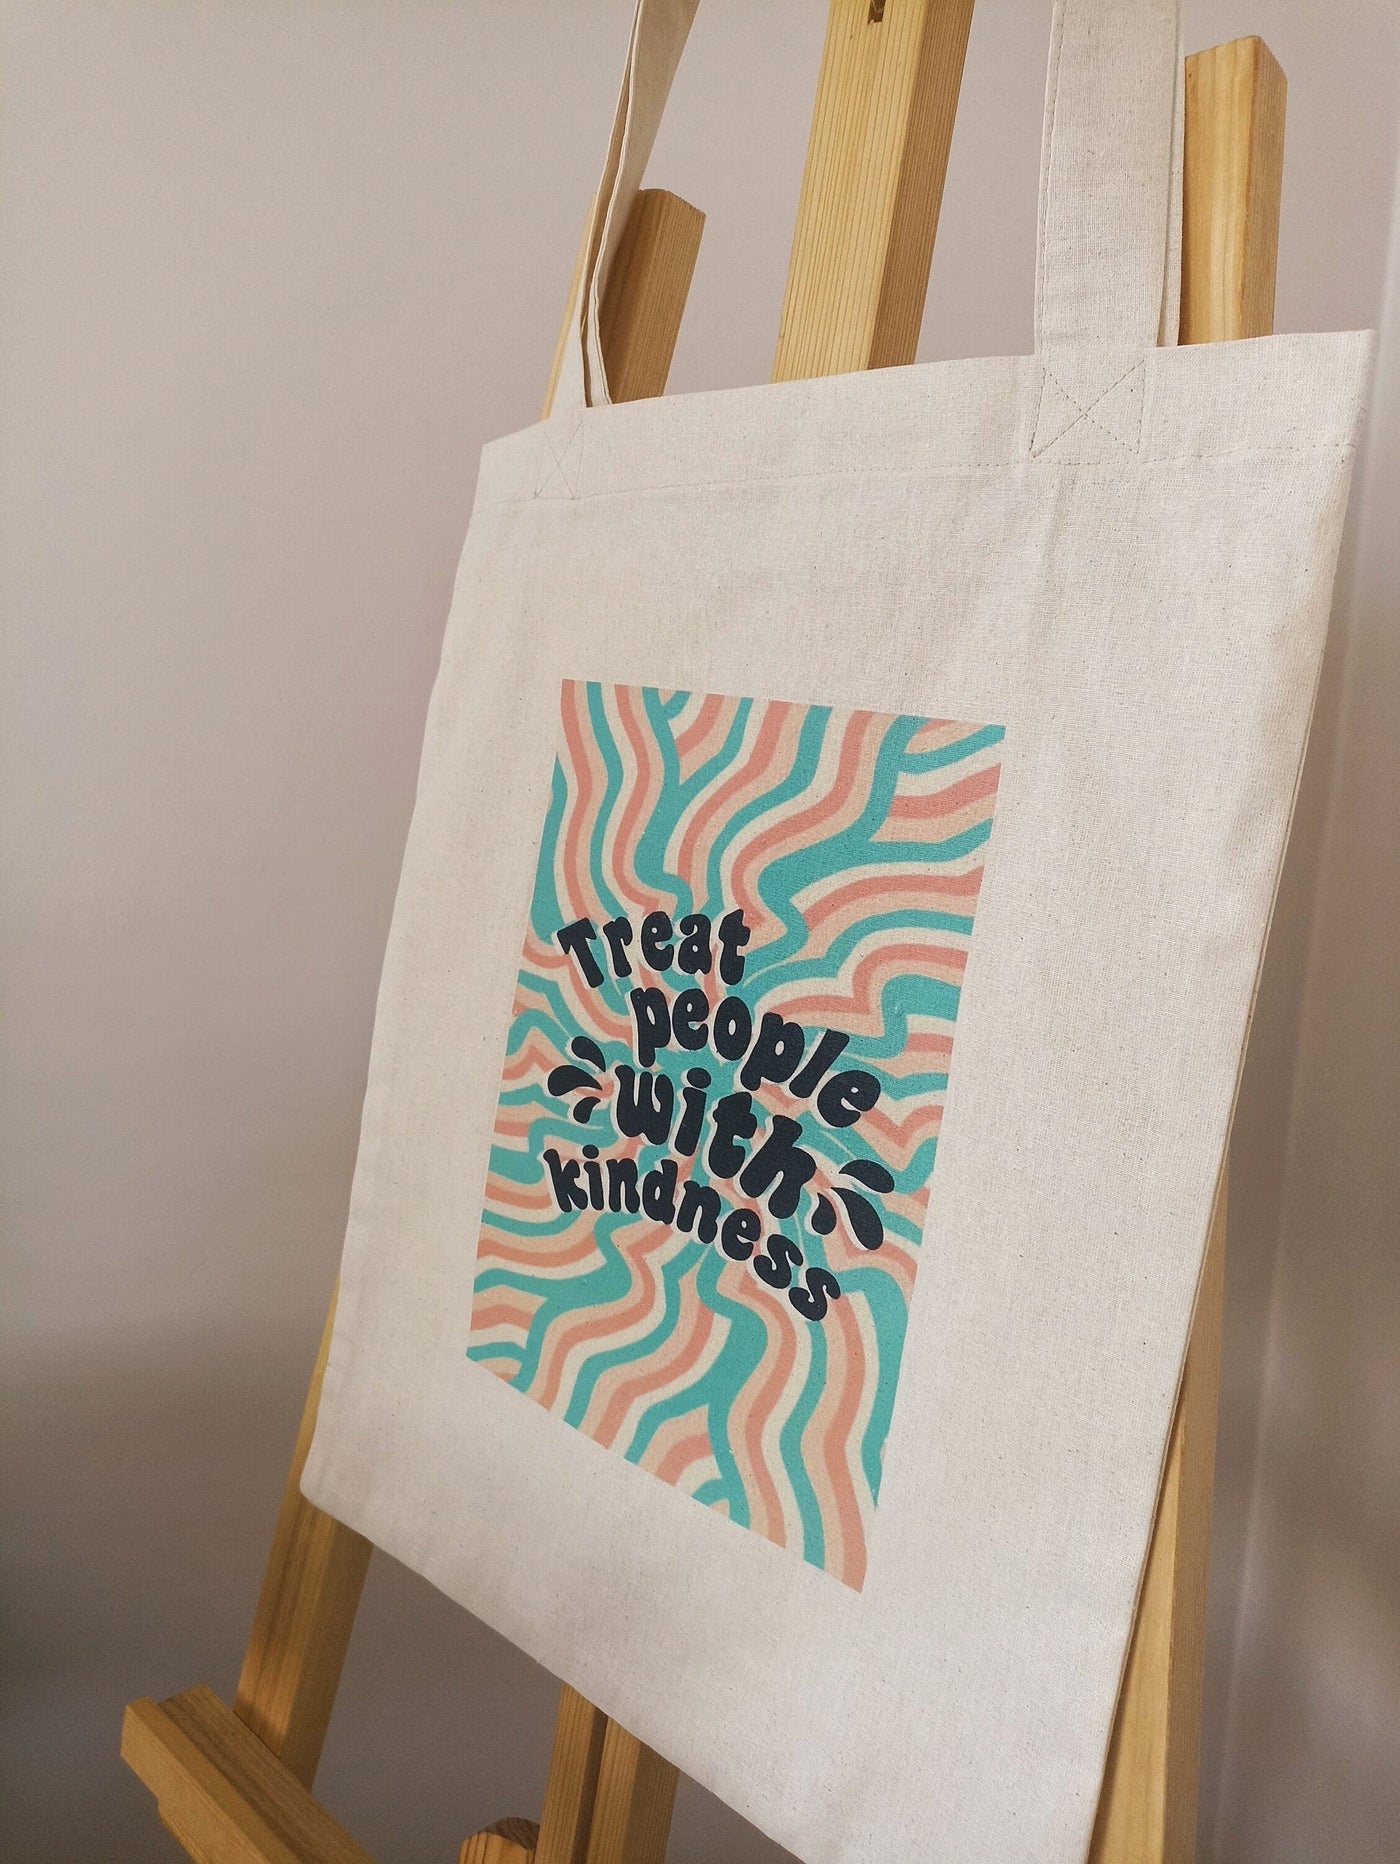 TPWK Tote Bag, Harry Styles Merch, Treat People With Kindness Tote Bag, Aesthetic Harry Styles